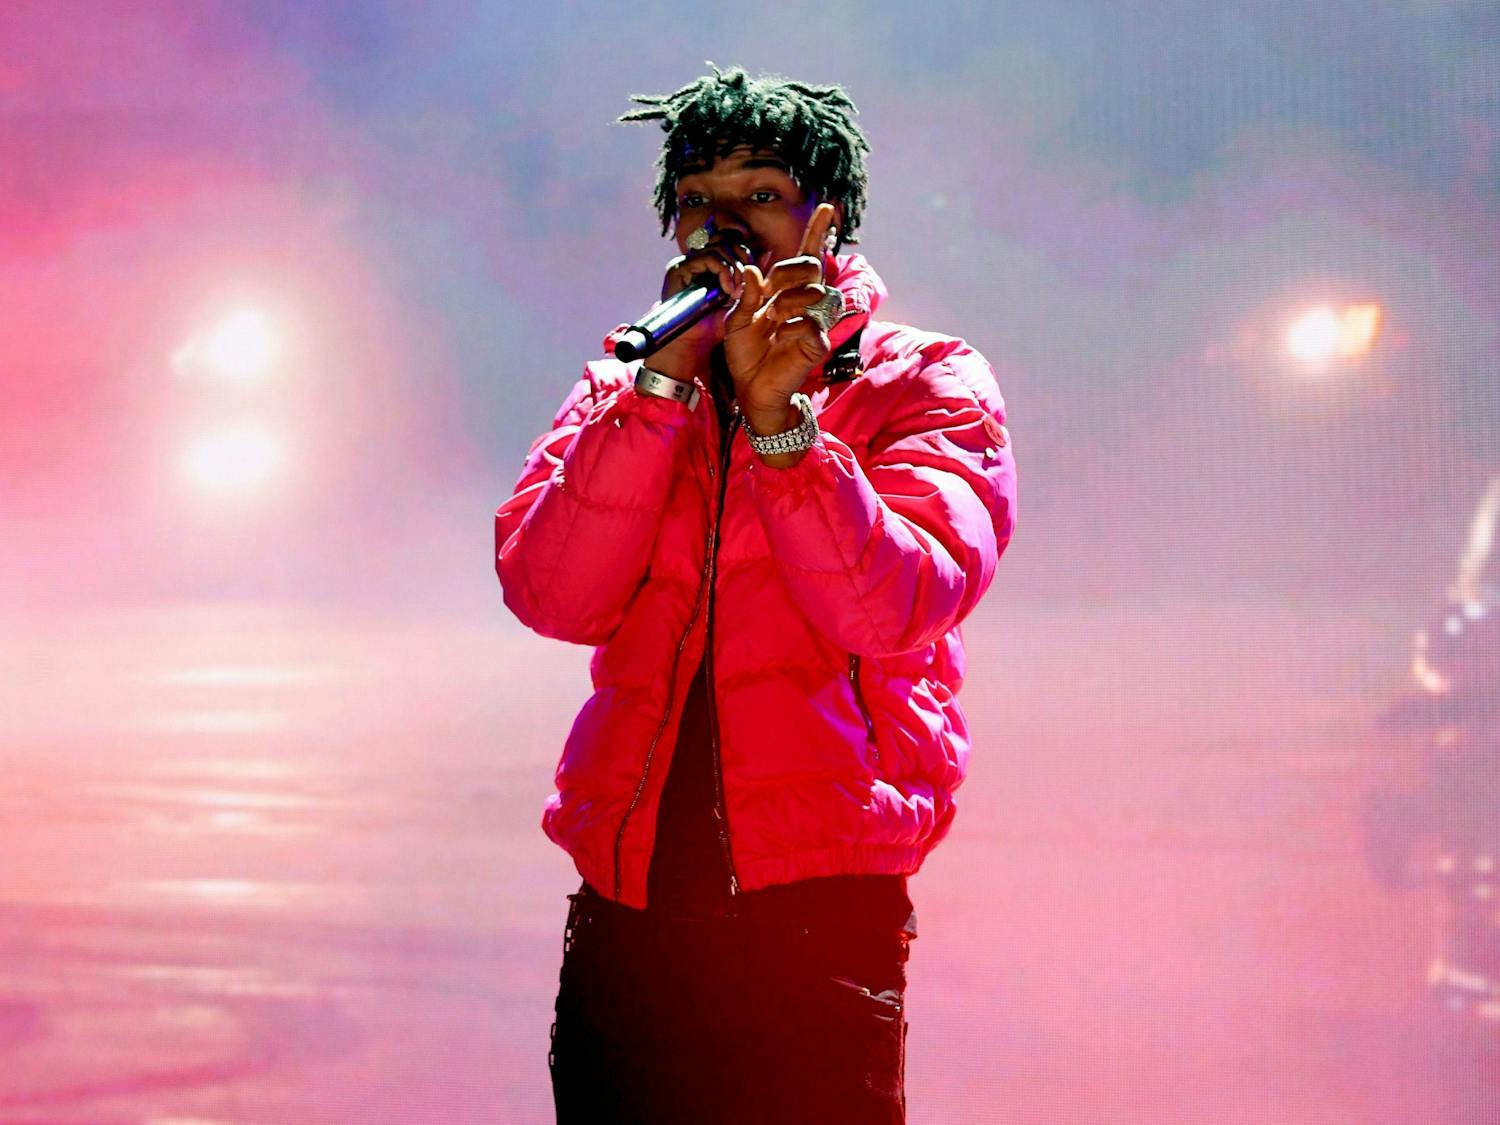 Lil Baby performs onstage during the iHeartRadio Album Release Party with Lil Baby at the iHeartRadio Theater on March 2, 2020 in Burbank, California. (Kevin Winter/Getty Images/TNS) 